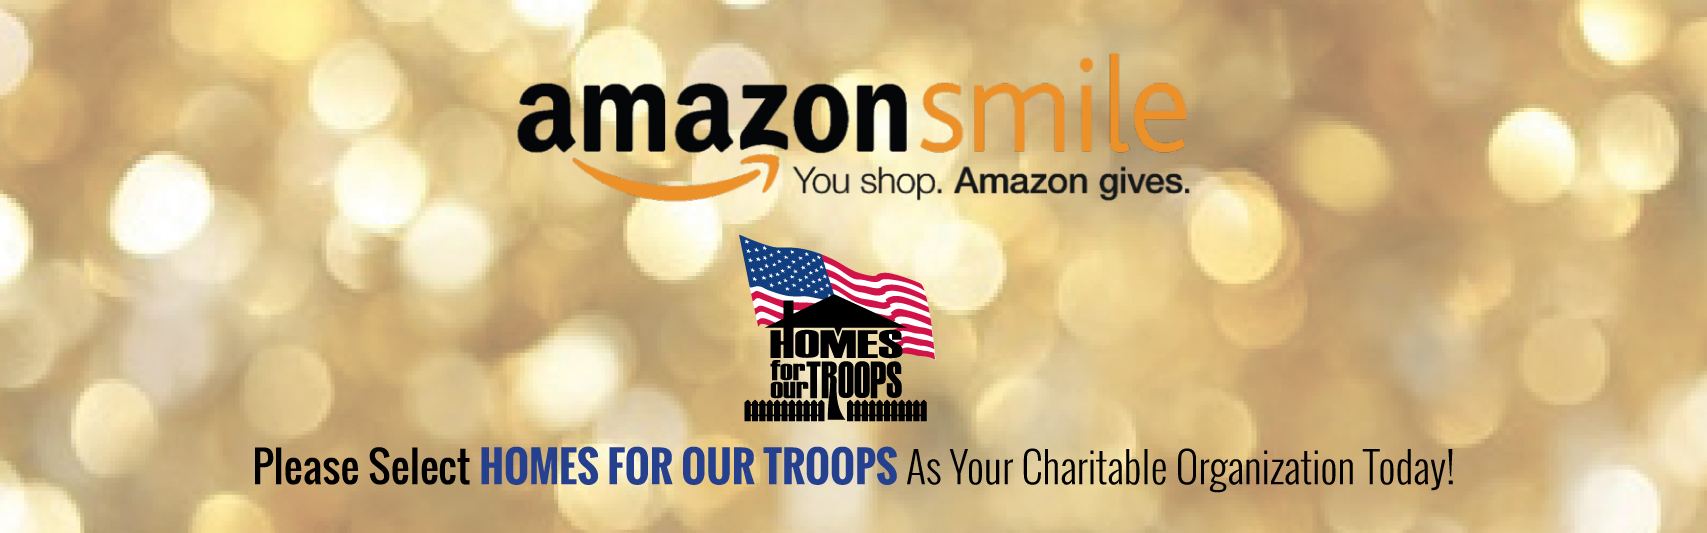 Support Homes For Our Troops on Amazon Smile